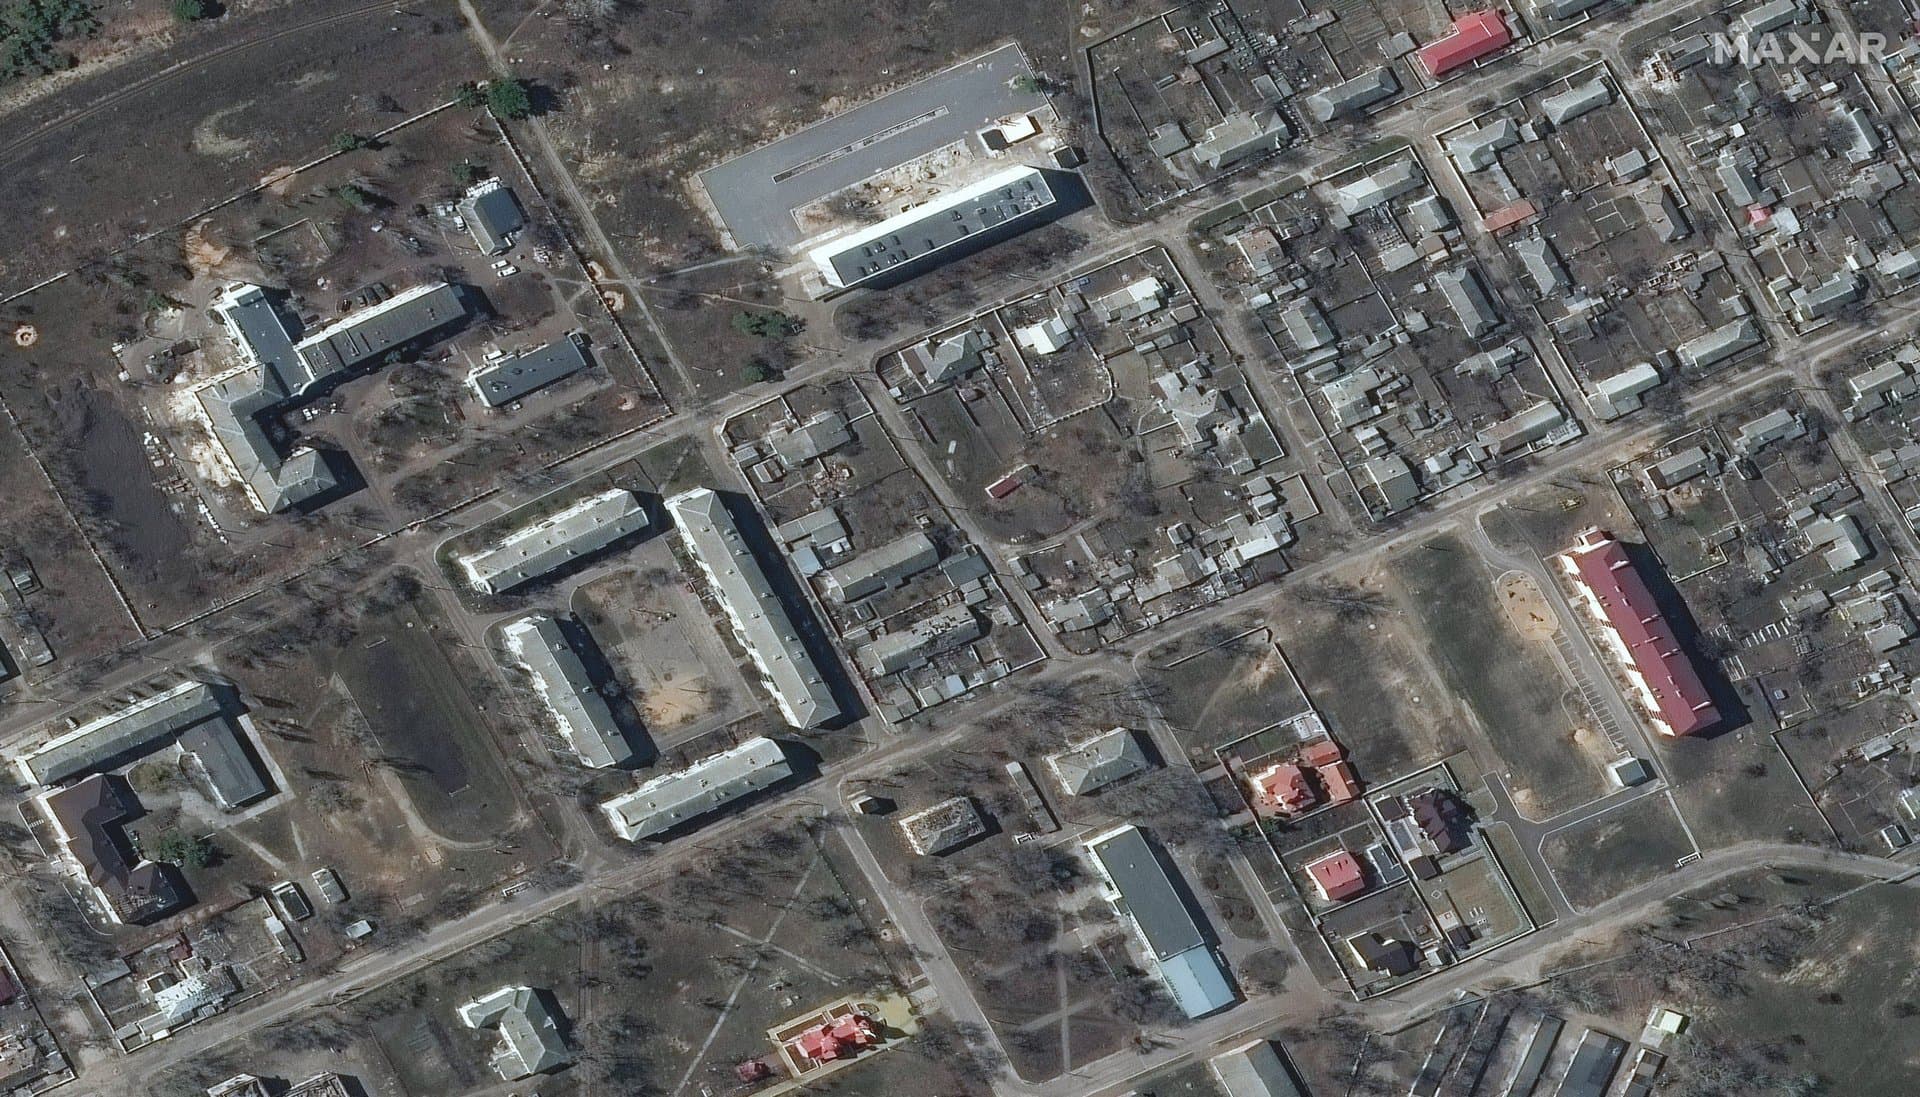 This satellite image provided shows Rubizhne on March 29 before the assault